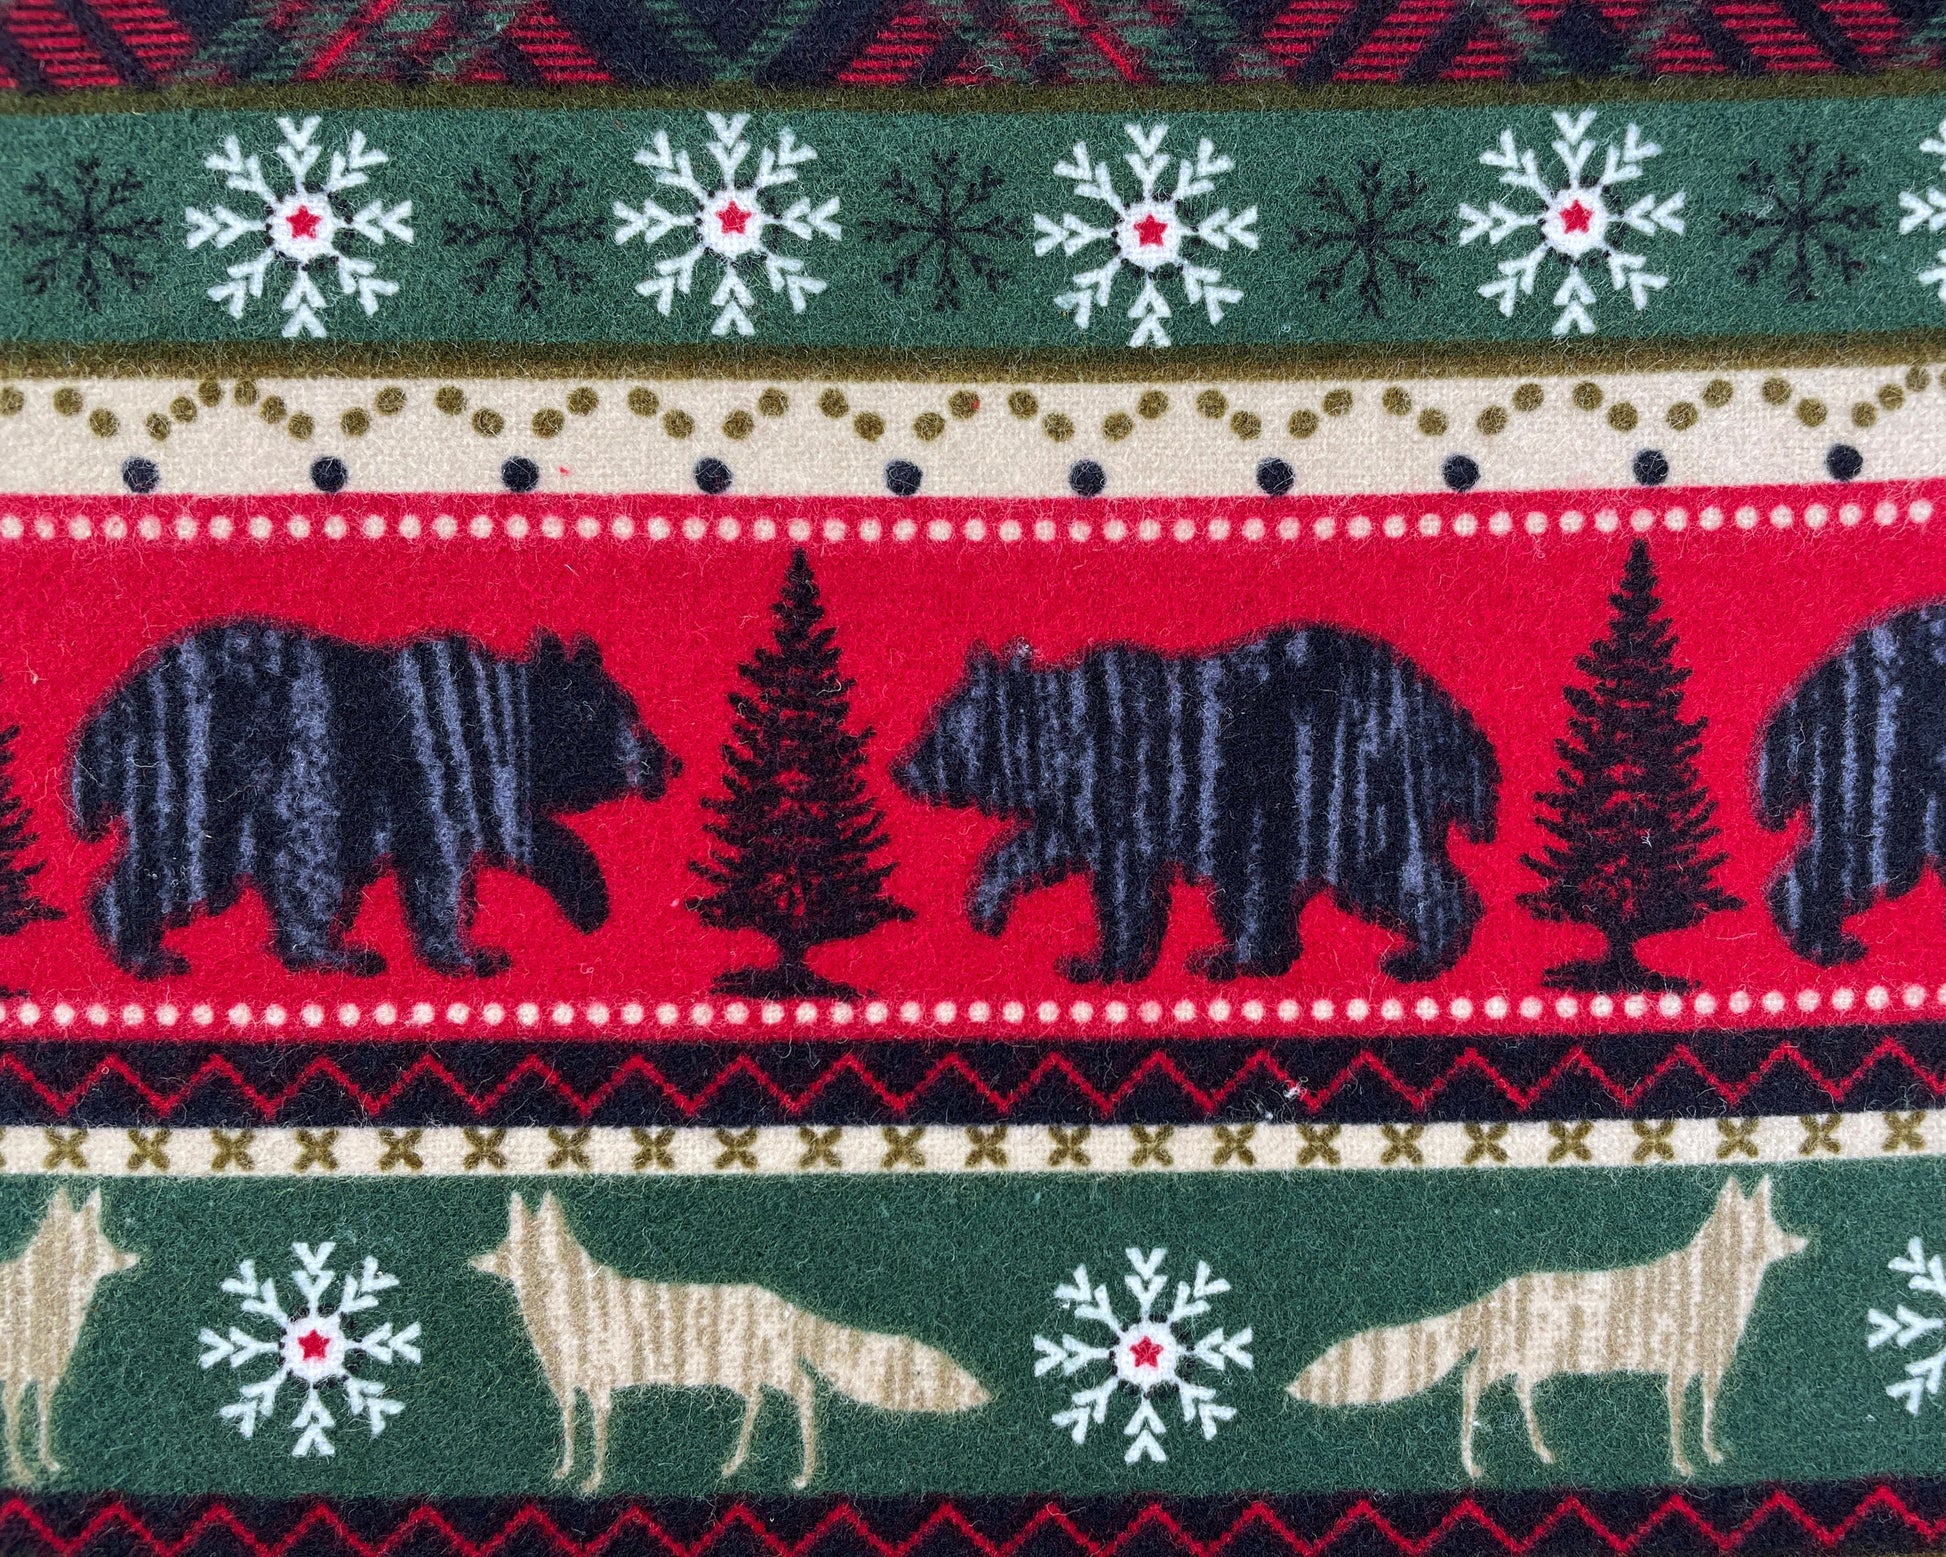 Woodland Animals Striped Super Snuggle Flannel Fabric - 100% Cotton - Winter fabric featuring Bears and Wolves - SHIPS NEXT DAY